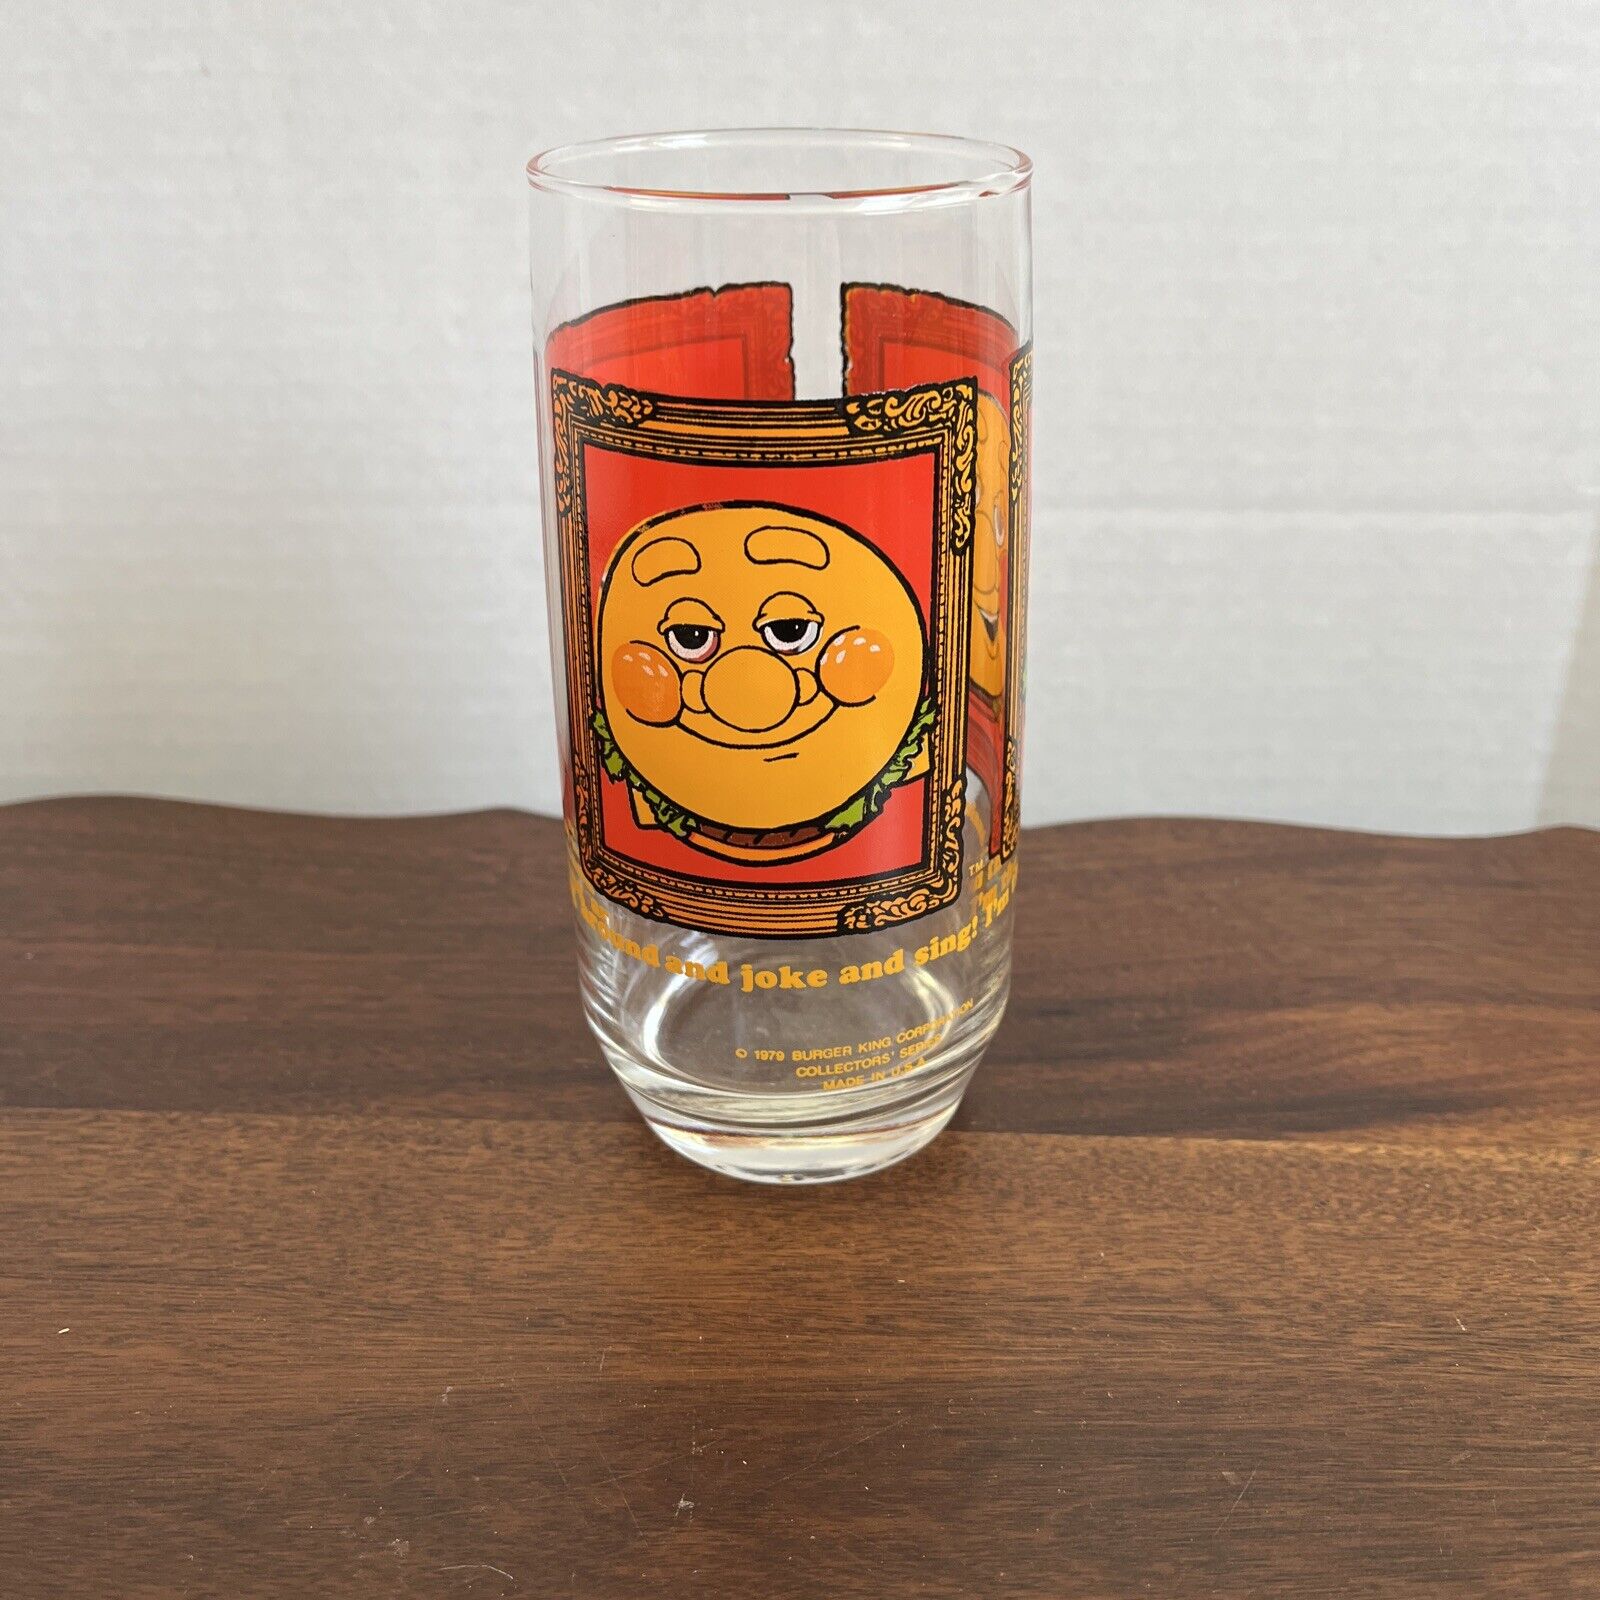 Vintage 1979 Burger King Glass Tumbler Collectors Series Made in USA 6\